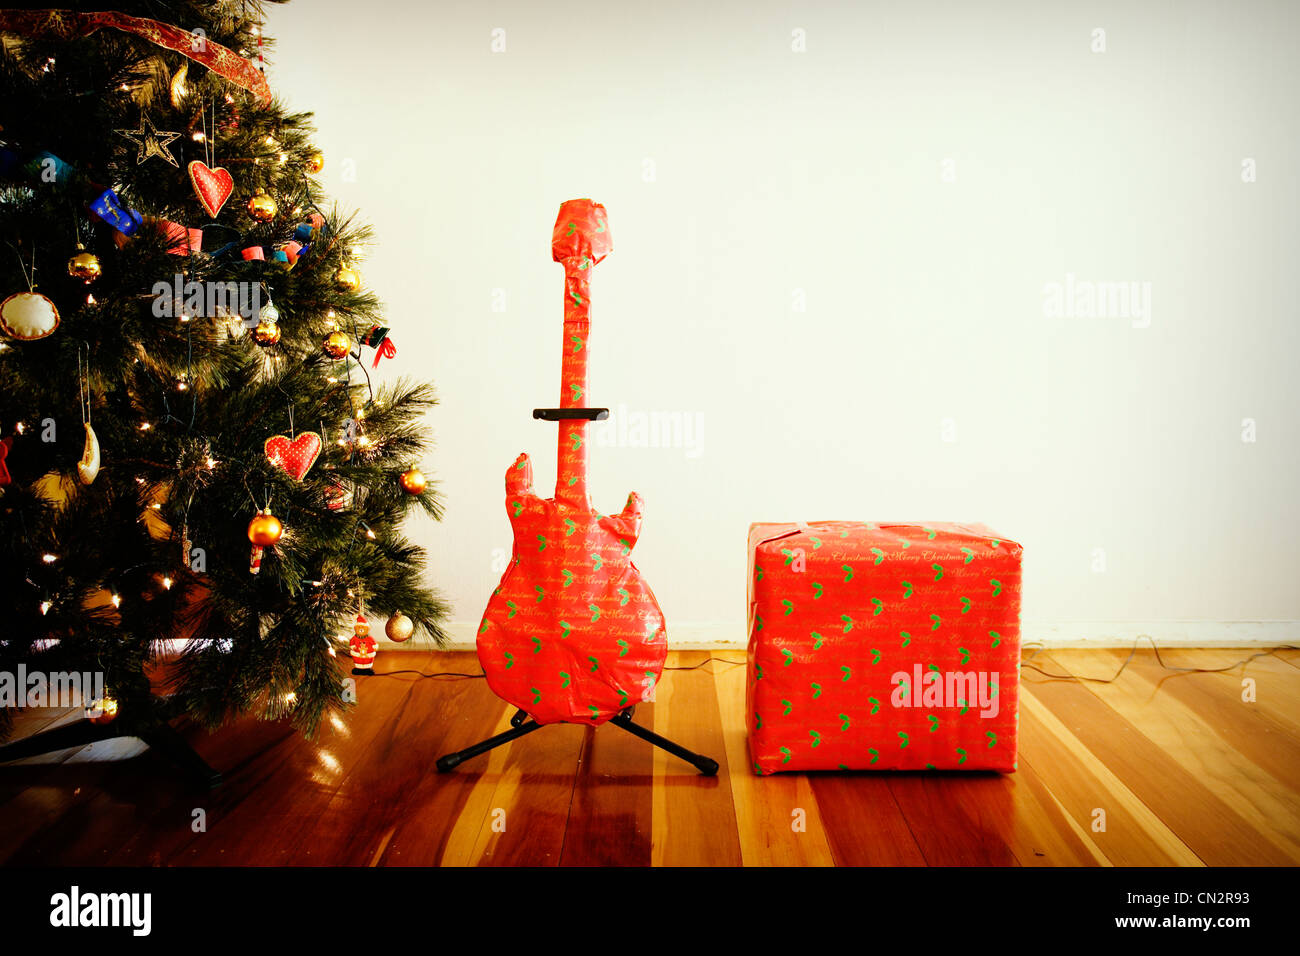 Guitar and amplfier christmas presents with tree. Stock Photo